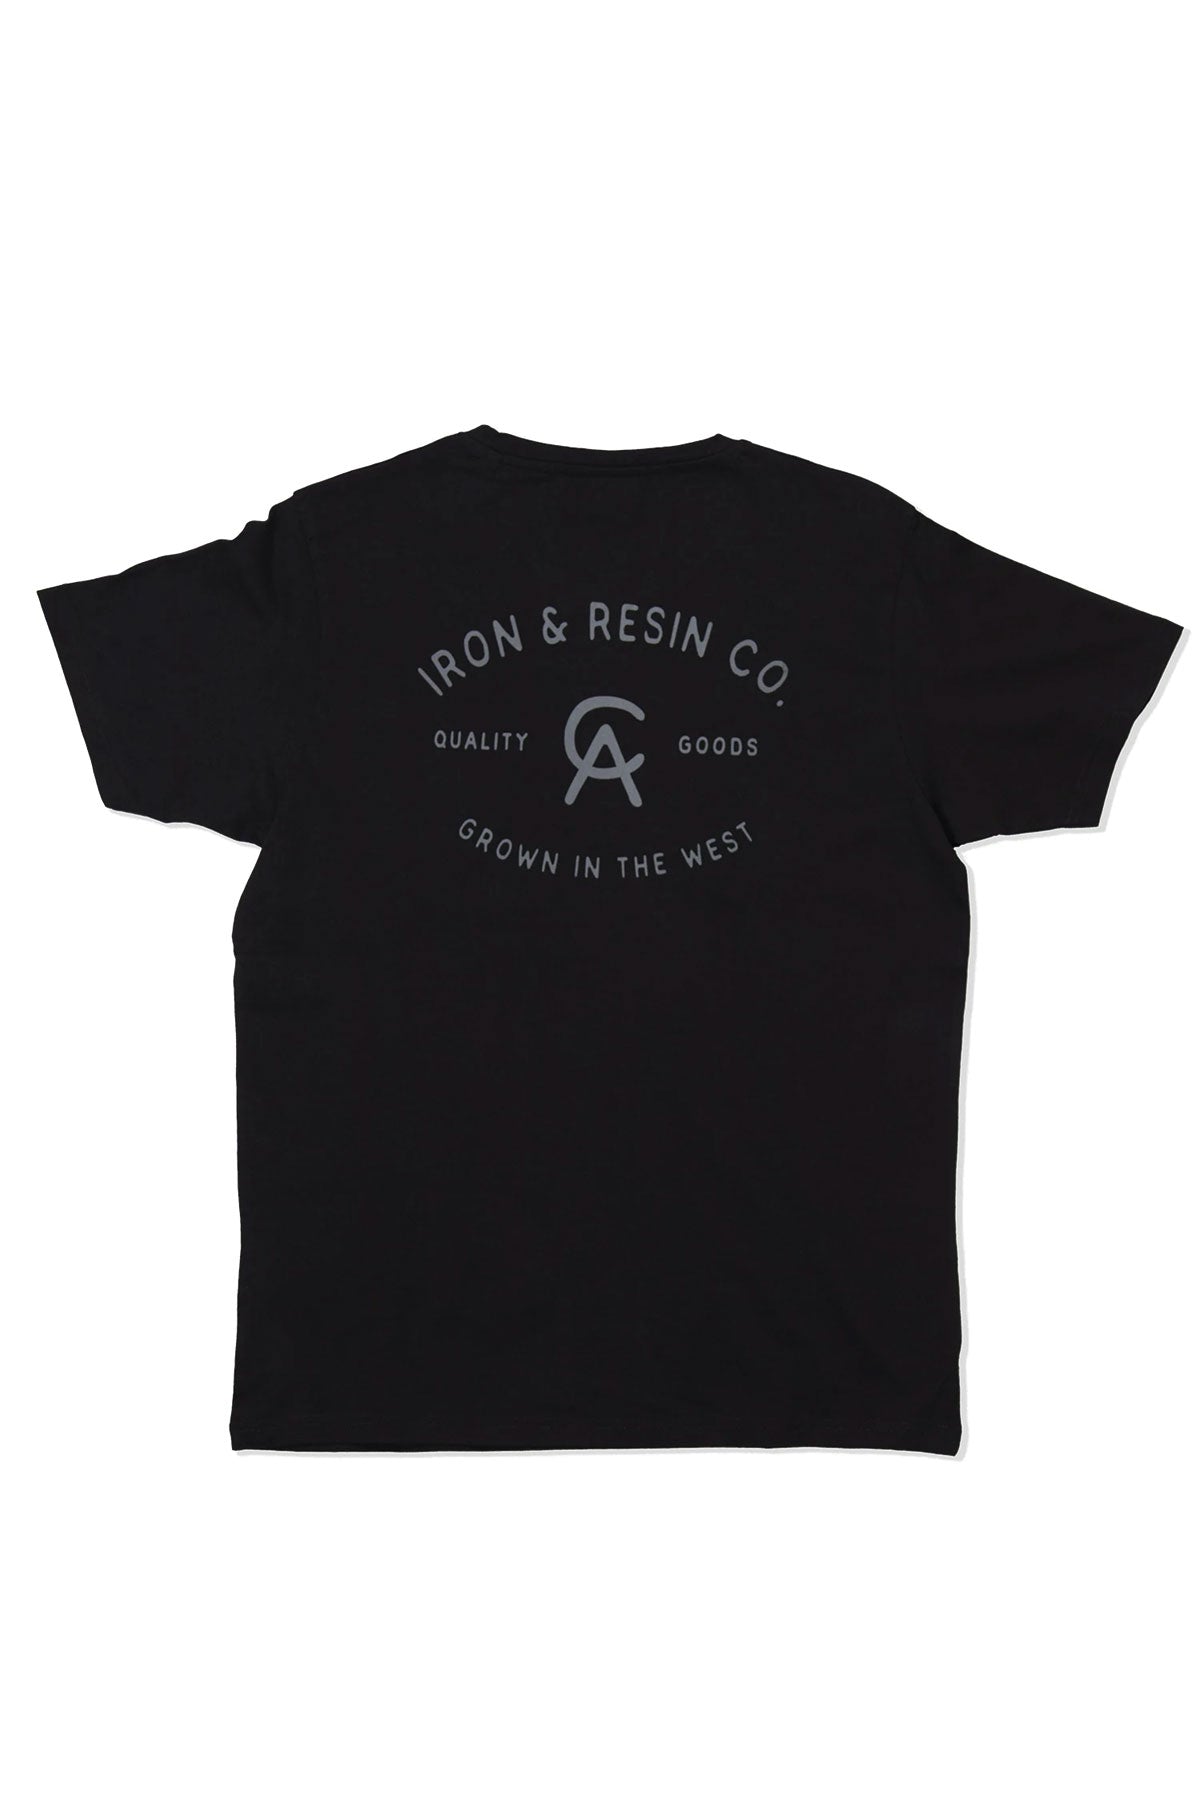 Iron And Resin - Grown in The West Pocket Tee